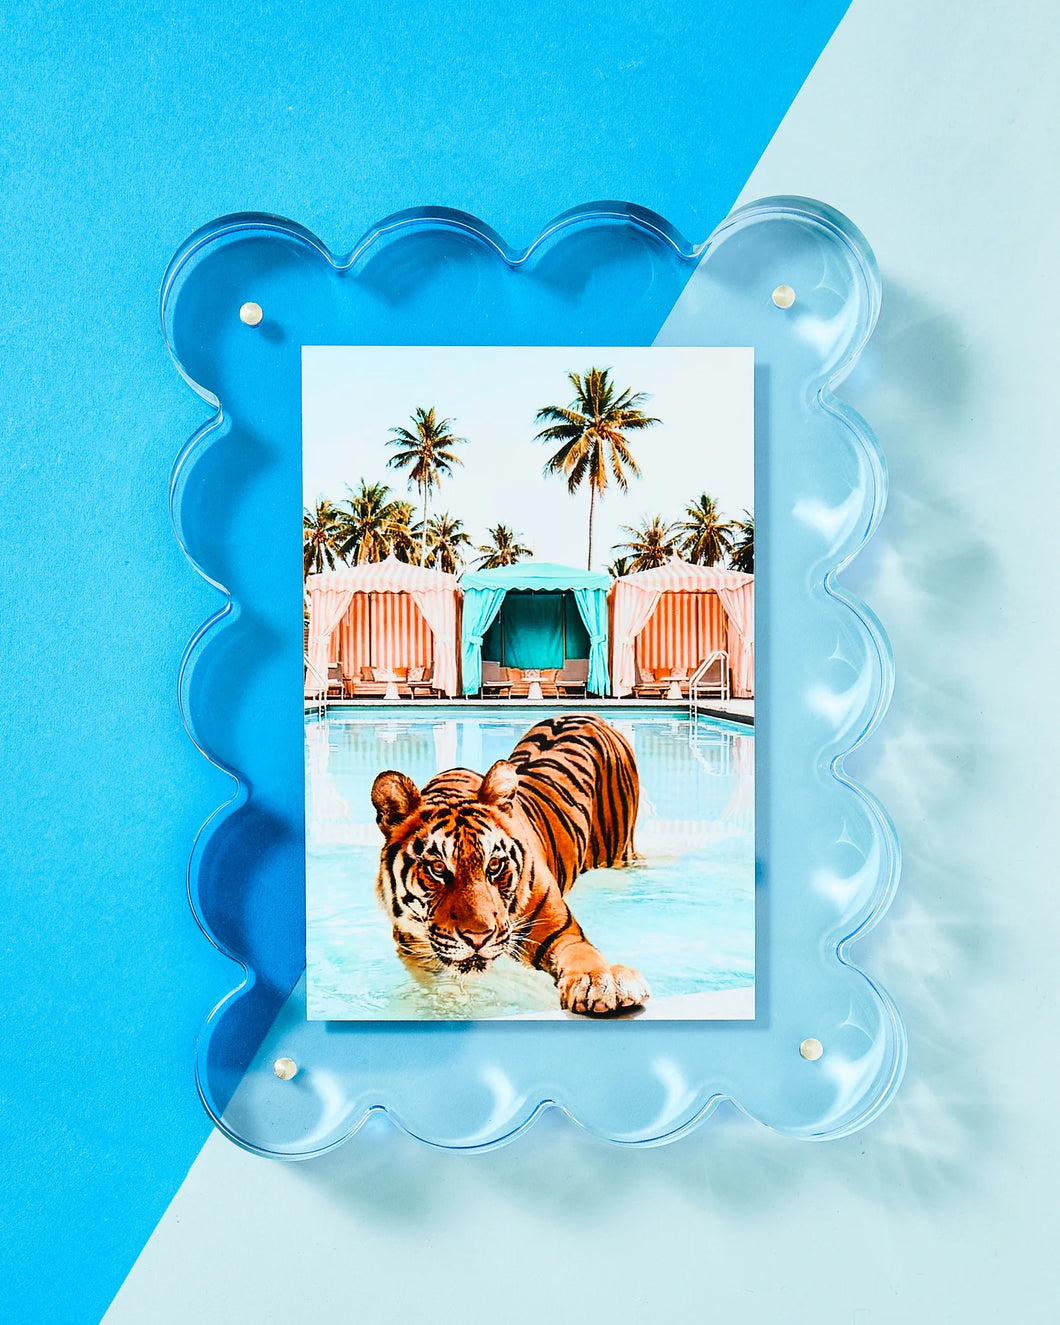 Blue Acrylic Picture Frame